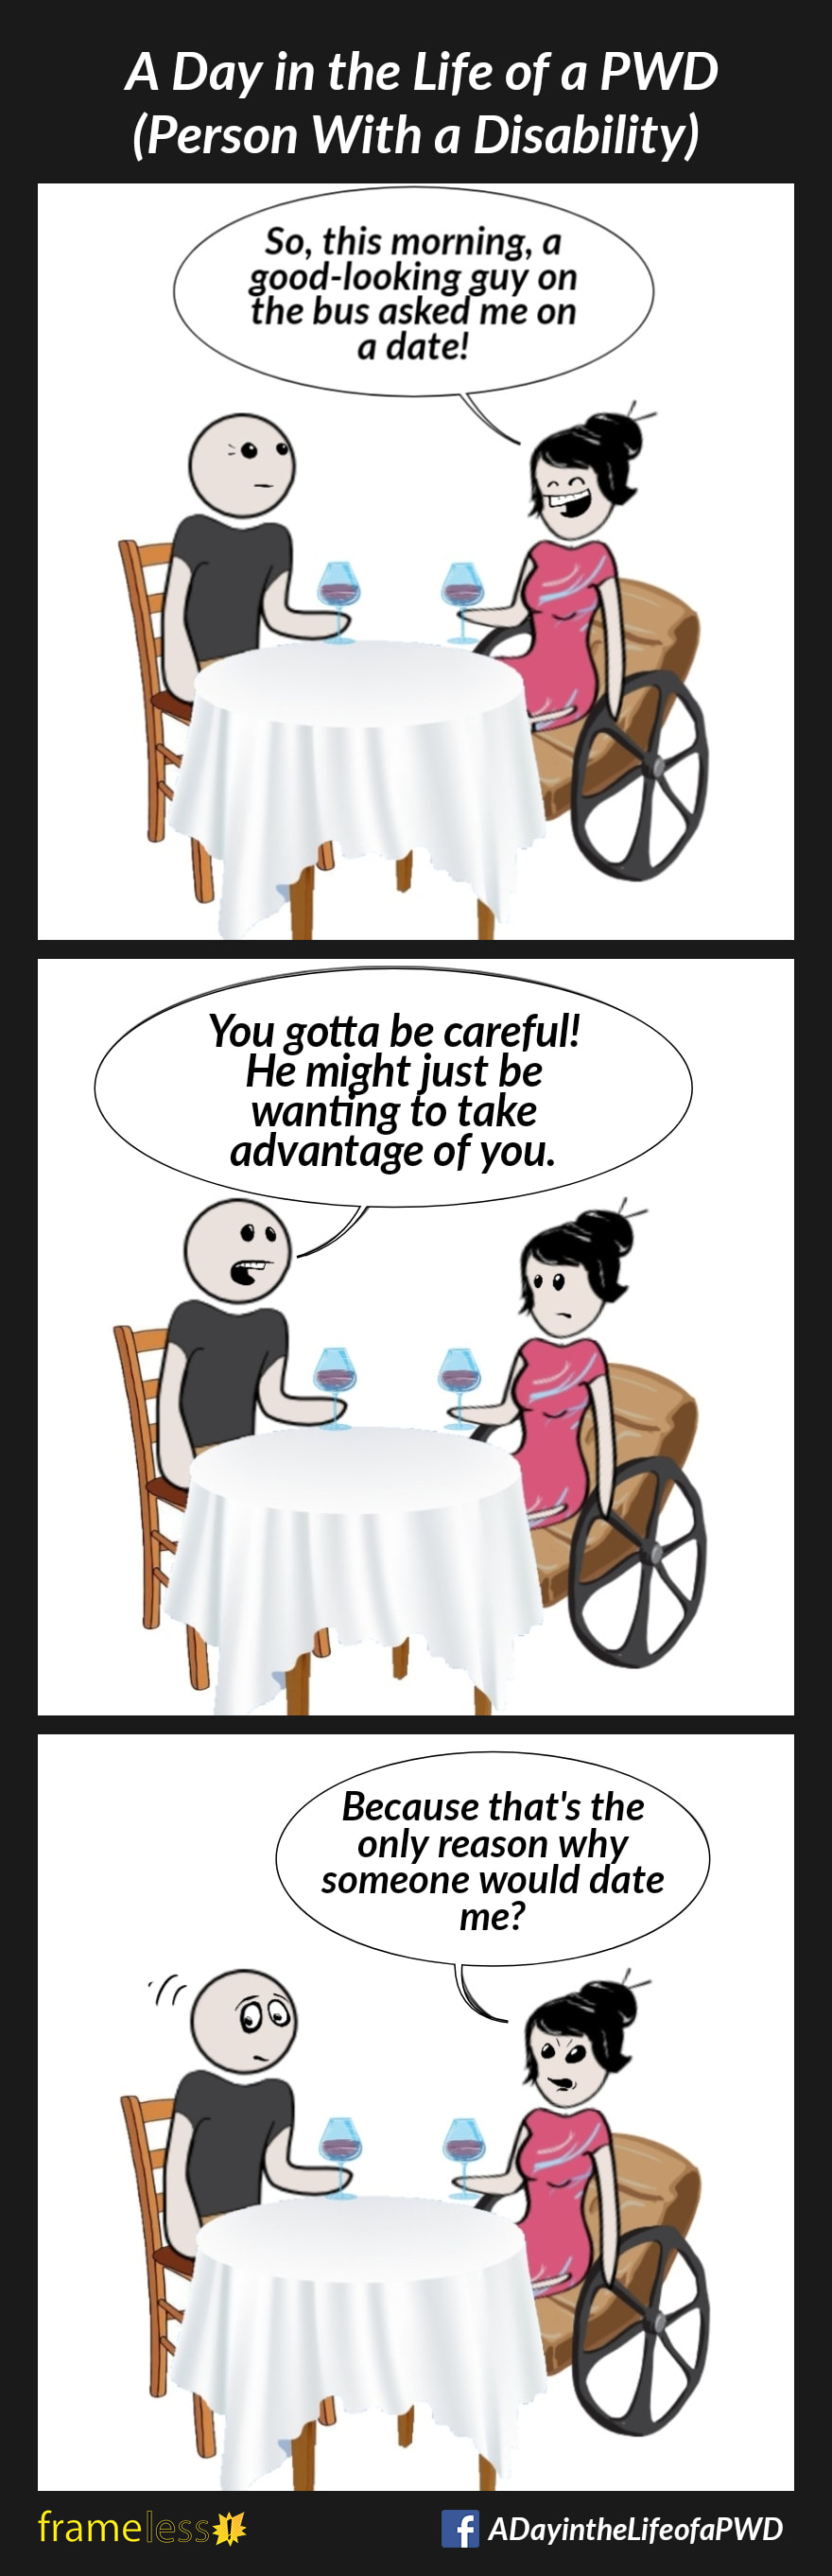 COMIC STRIP 
A Day in the Life of a PWD (Person With a Disability) 

Frame 1:
A woman in a wheelchair is sitting at a restaurant table with a male friend.
WOMAN: So, this morning, a good-looking guy on the bus asked me on a date!

Frame 2:
FRIEND: You gotta be careful! He might just be wanting to take advantage of you!

Frame 3:
WOMAN (offended): Because that's the only reason someone would date me?